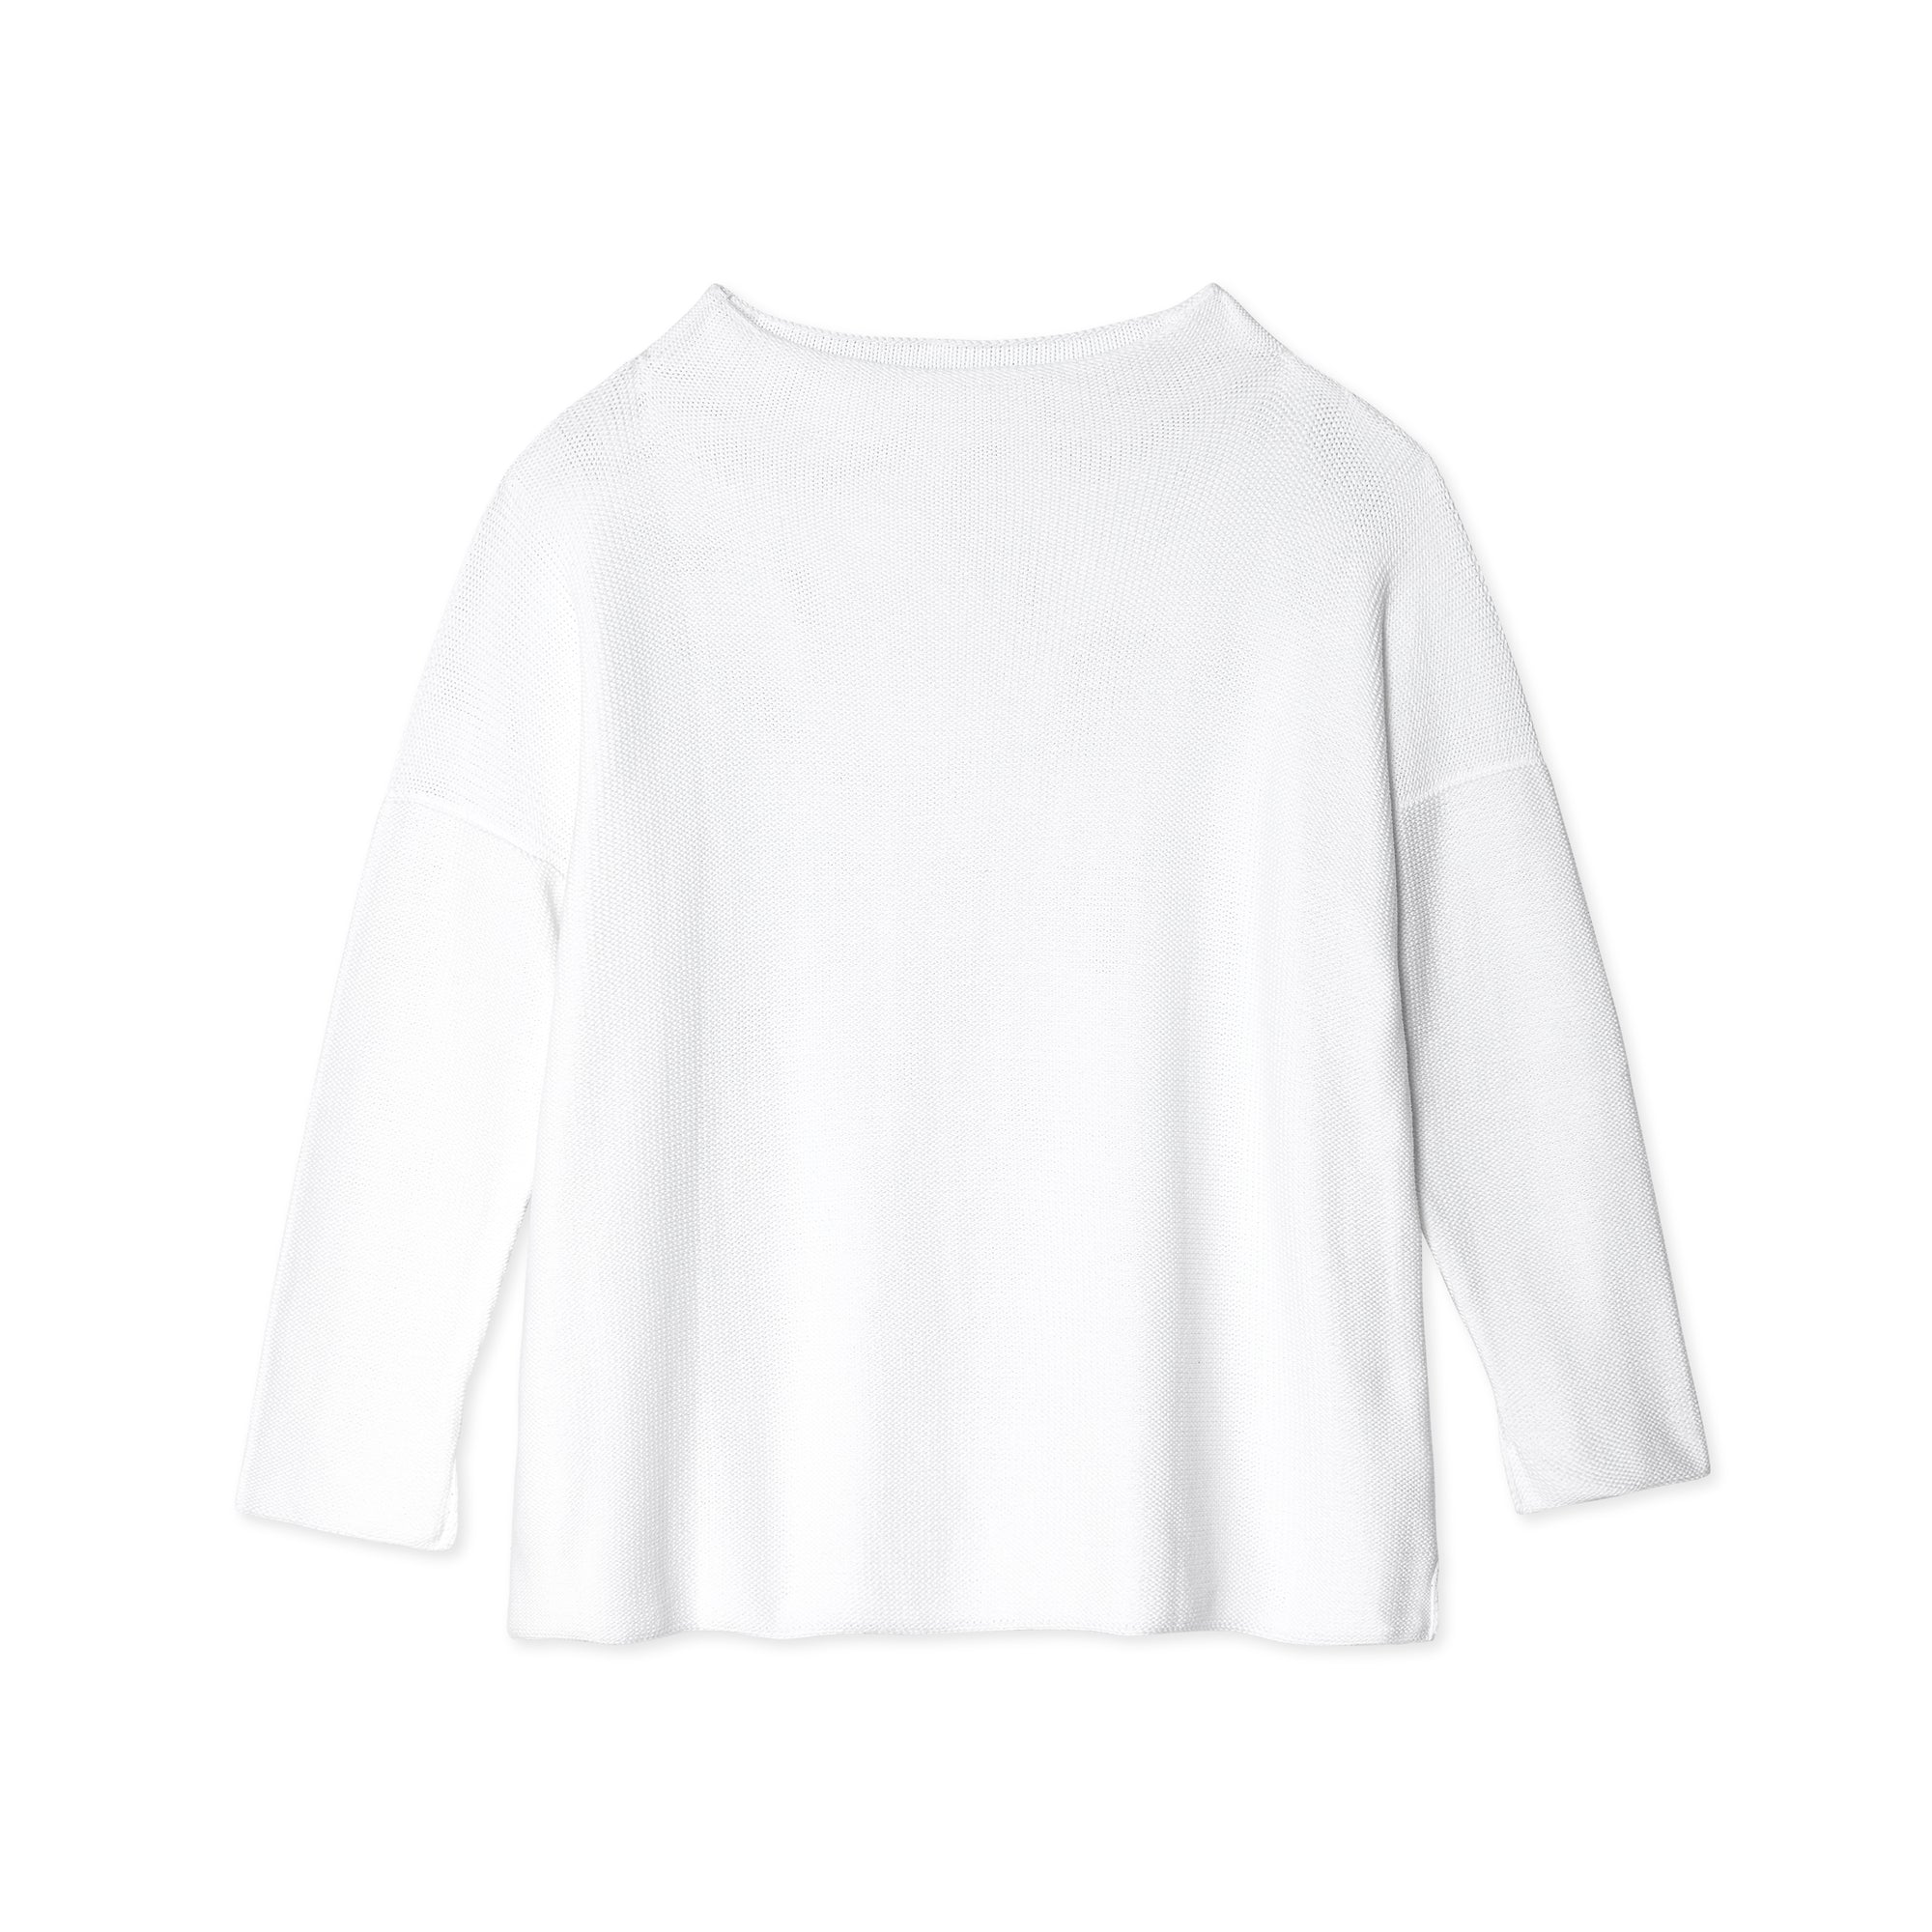 Daniela Gregis - Women’s Lupetto Knitted High Neck Sweater - (White) view 1